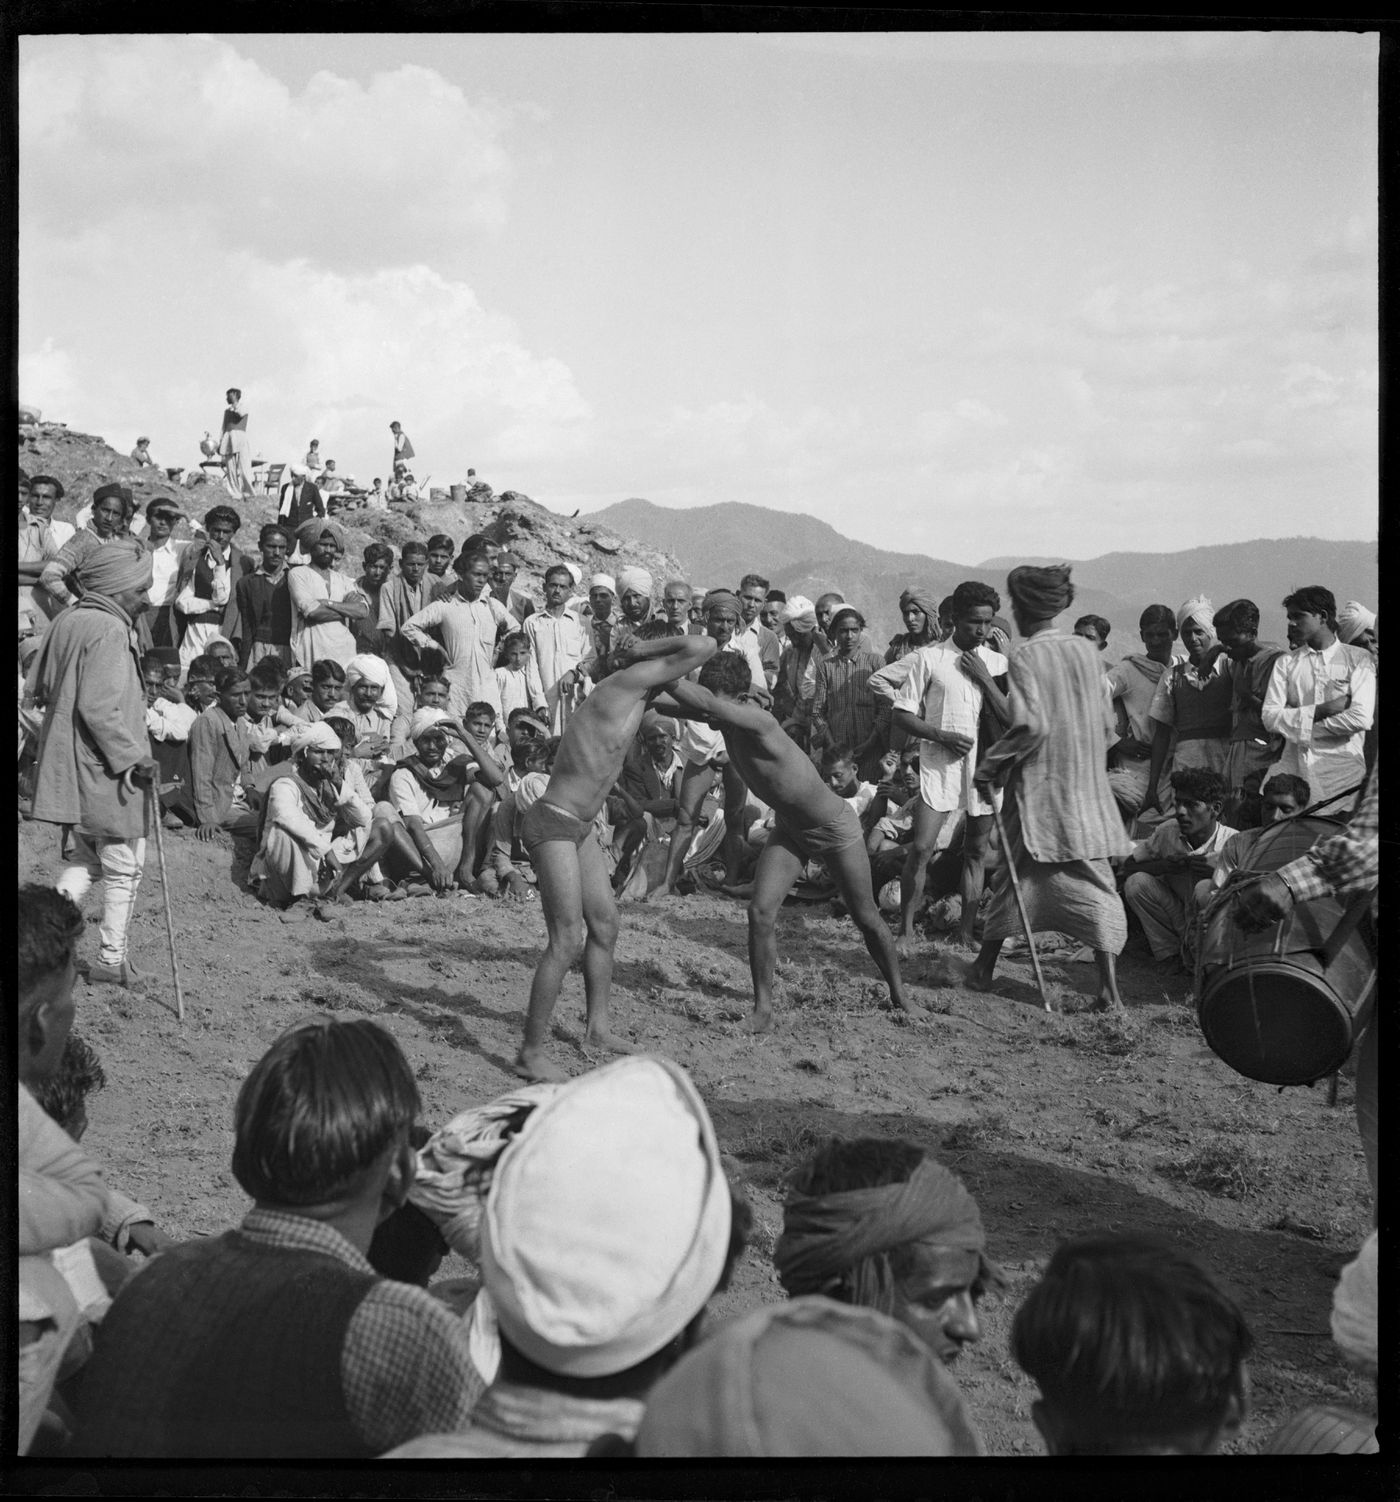 Crowd watching a wrestling match in Chandigarh's area before the construction, India